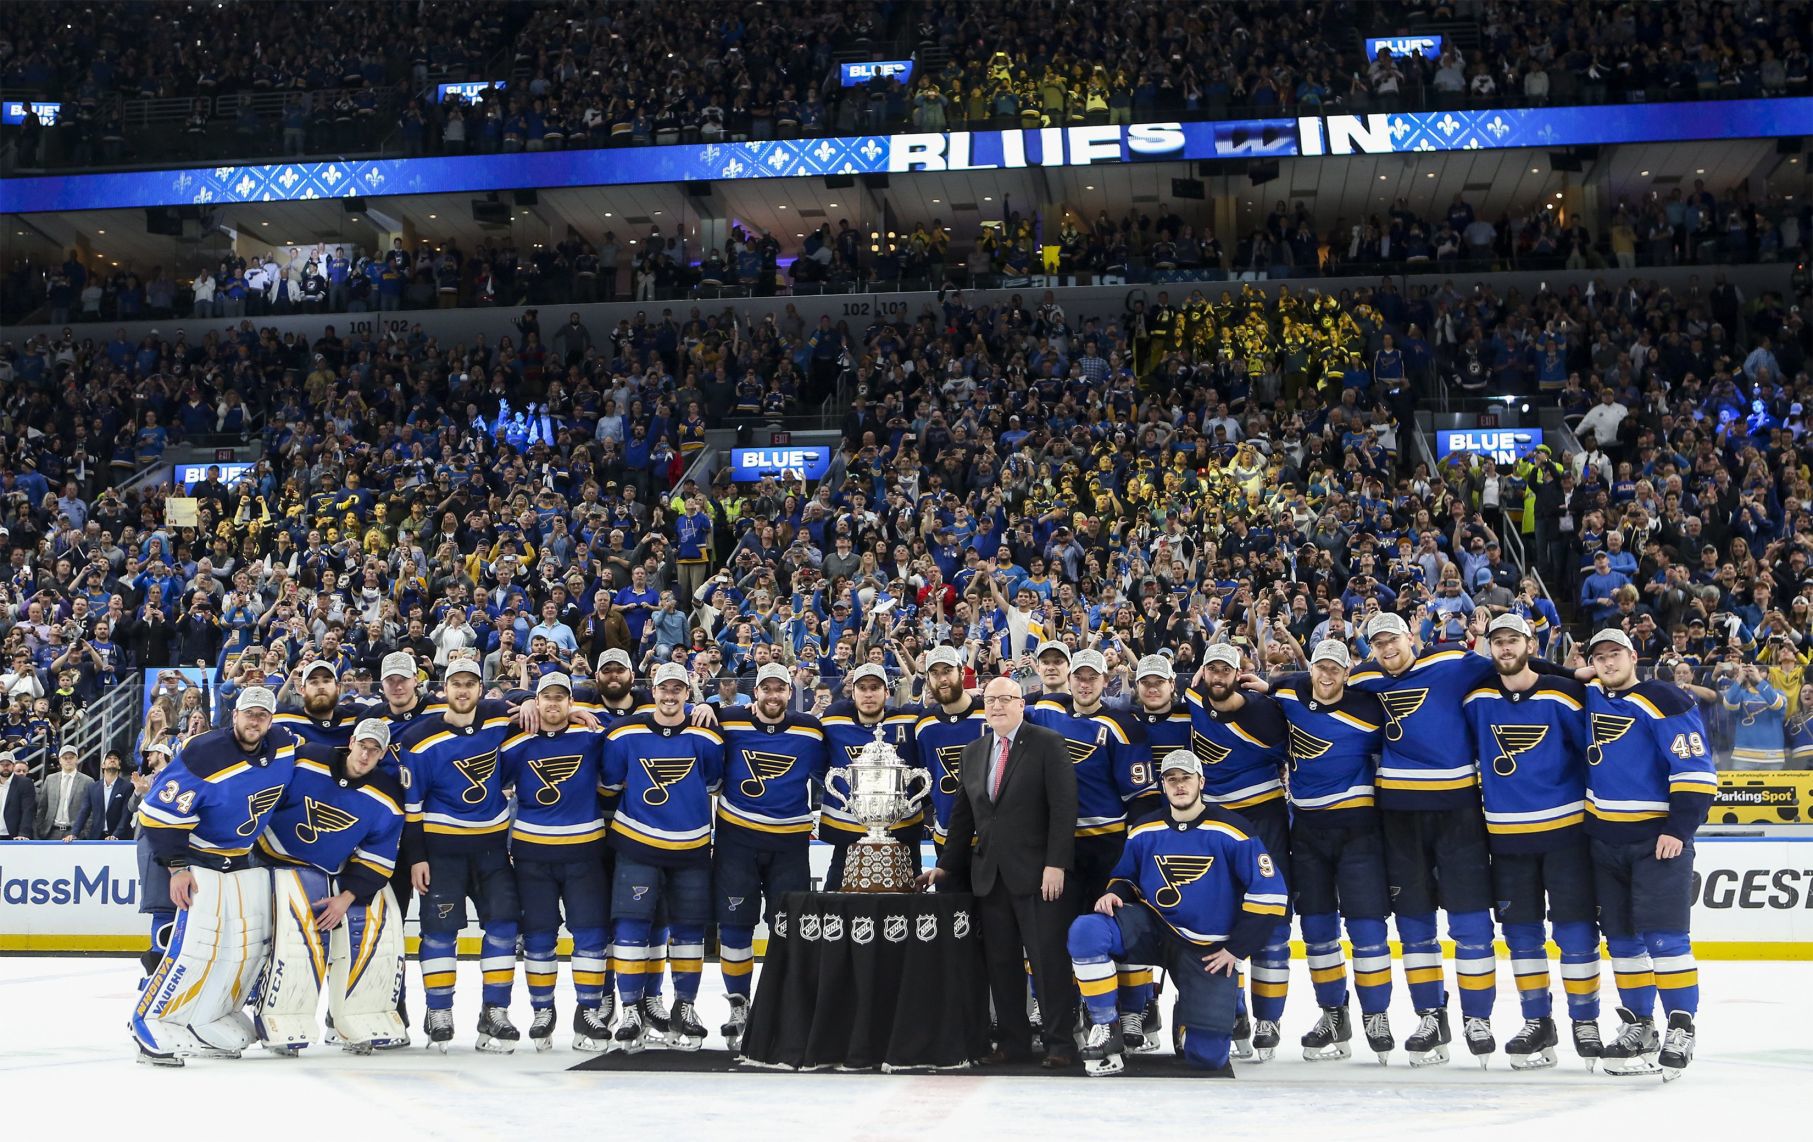 Blues set ratings record for game on cable TV